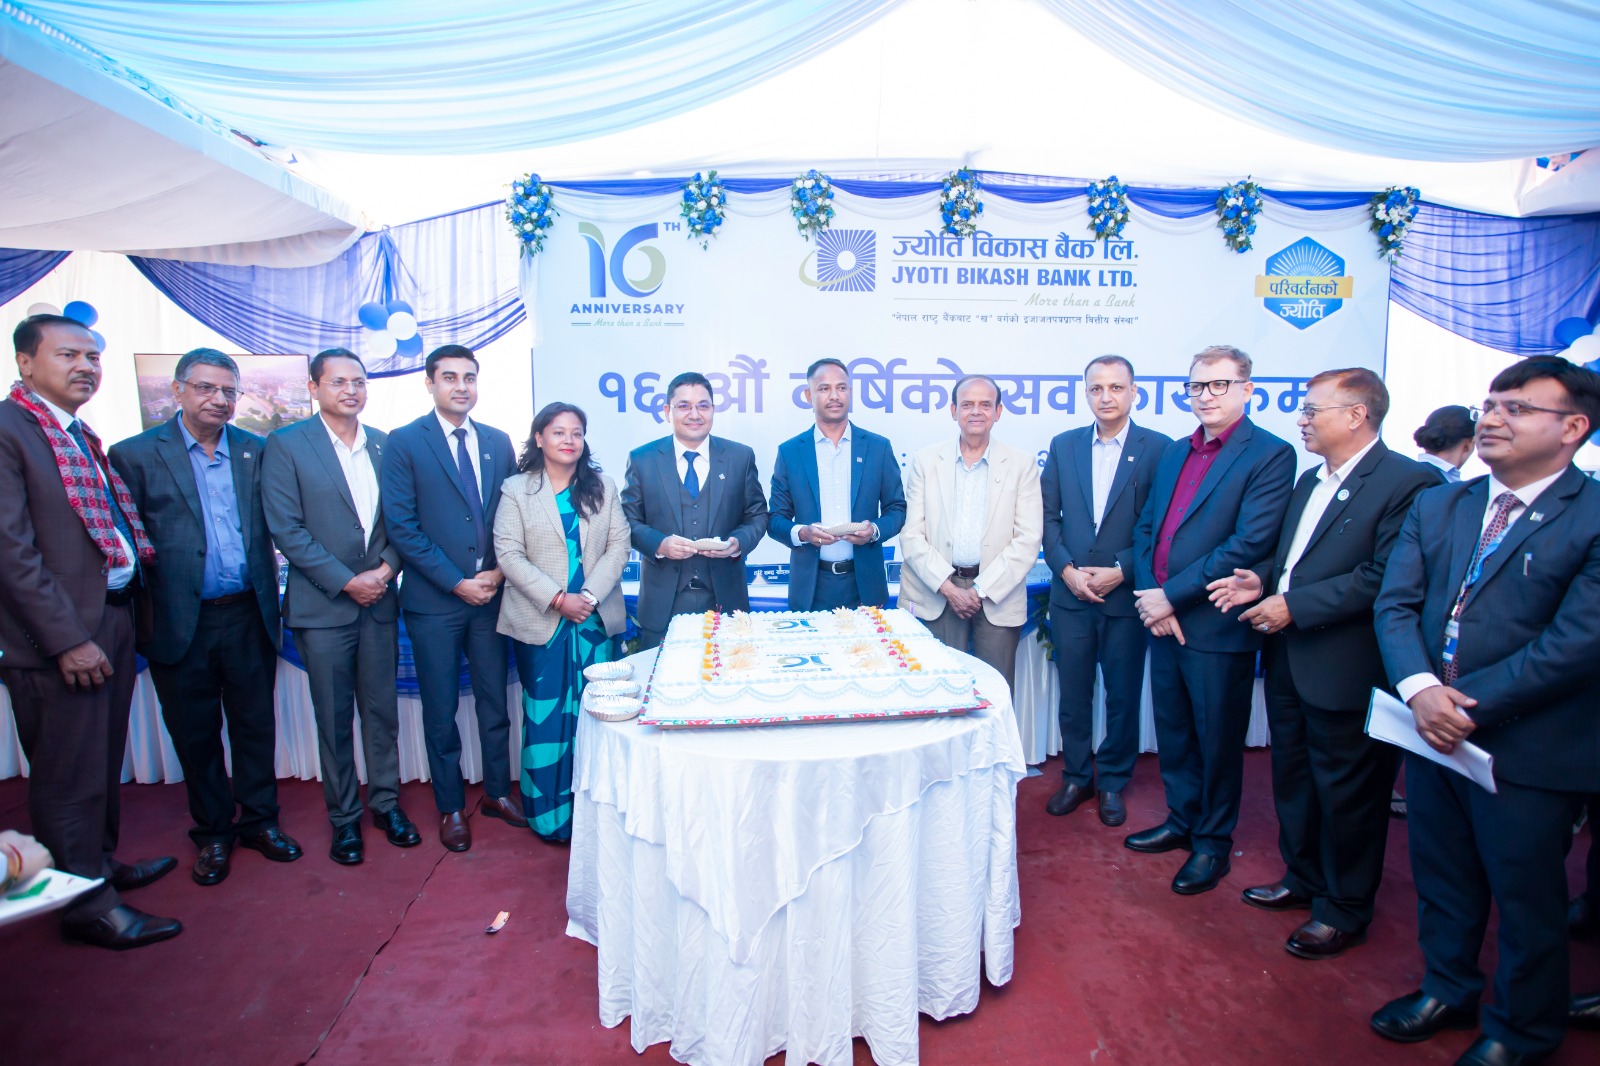 JBBL successfully concludes its 16th anniversary celebration